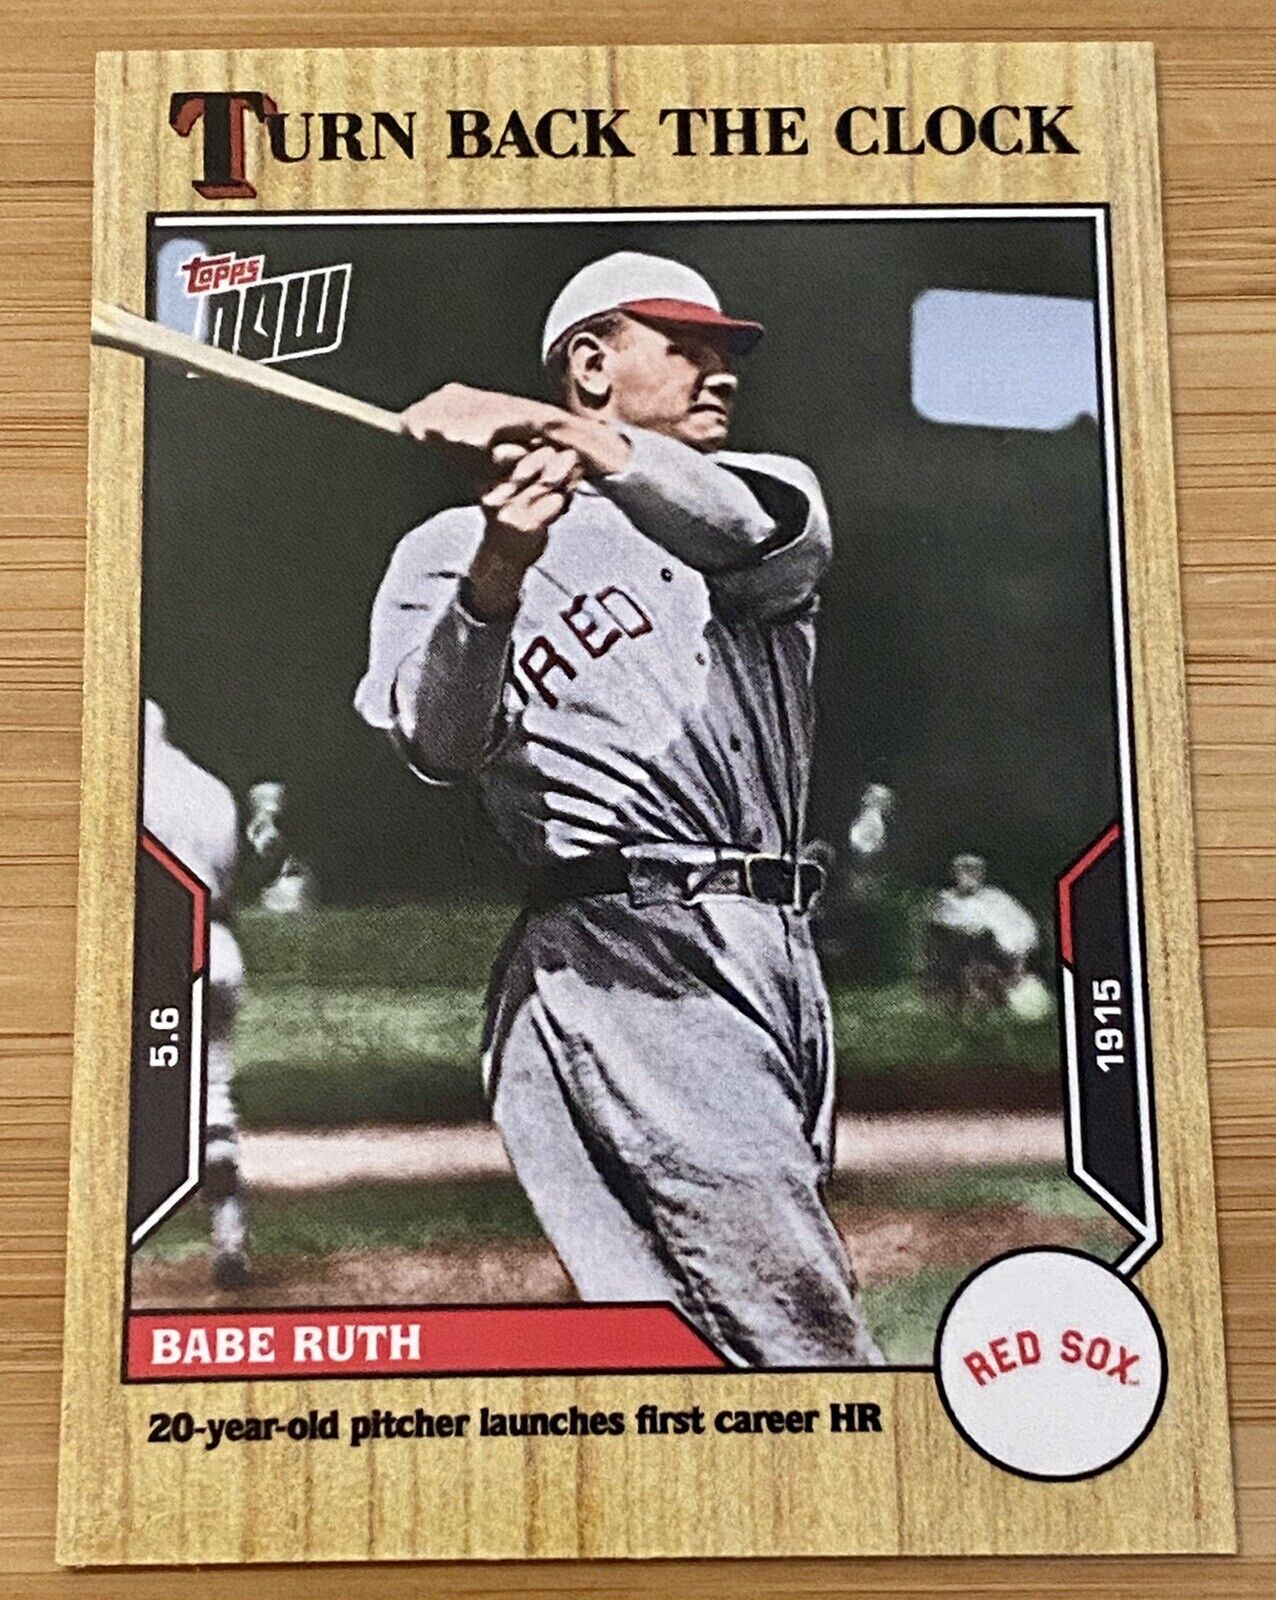 ROOKIE BABE RUTH, 20 y/o Pitcher Hits 1st HR in his 18th AB, Topps TBTC #36, RC